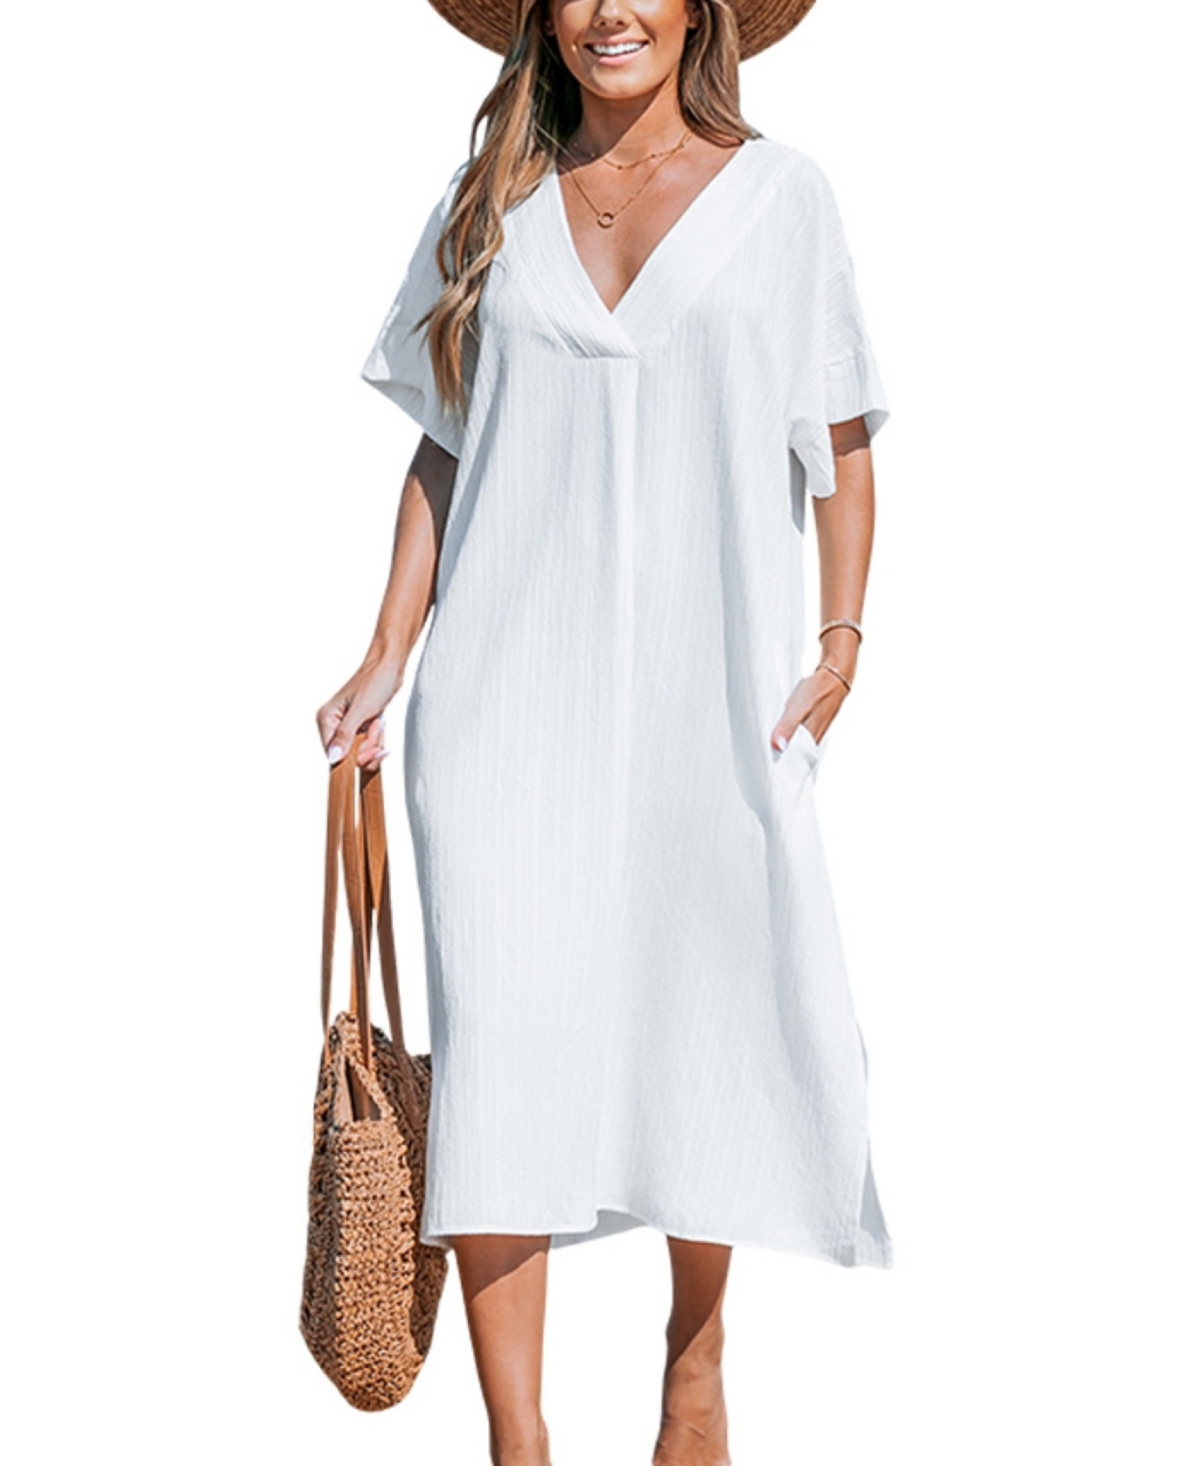 Women's White Dolman Sleeve Loose Fit Maxi Cover-Up Beach Dress - White